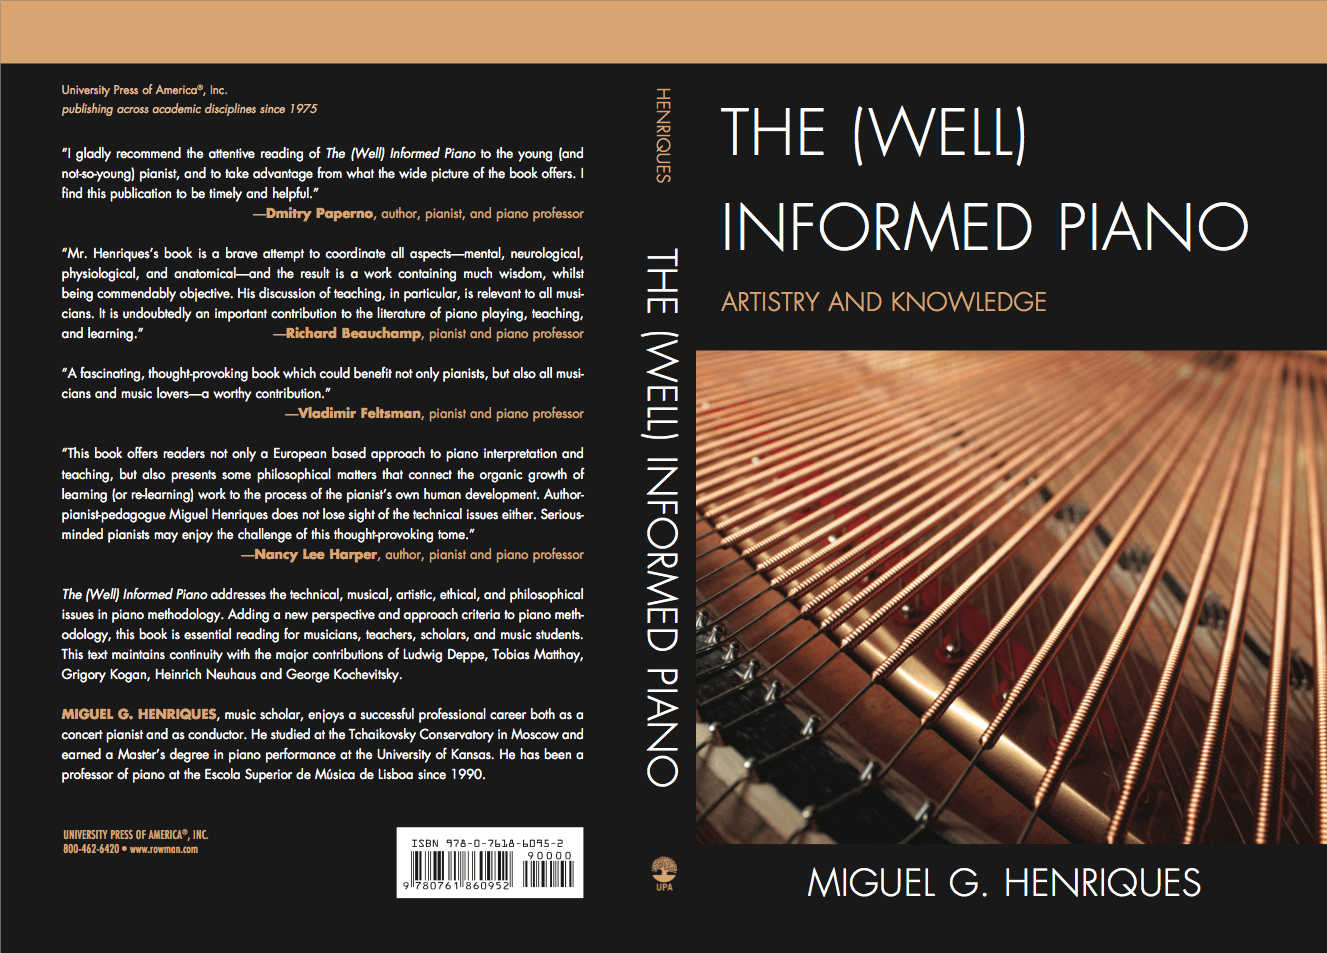 The (Well) Informed Piano